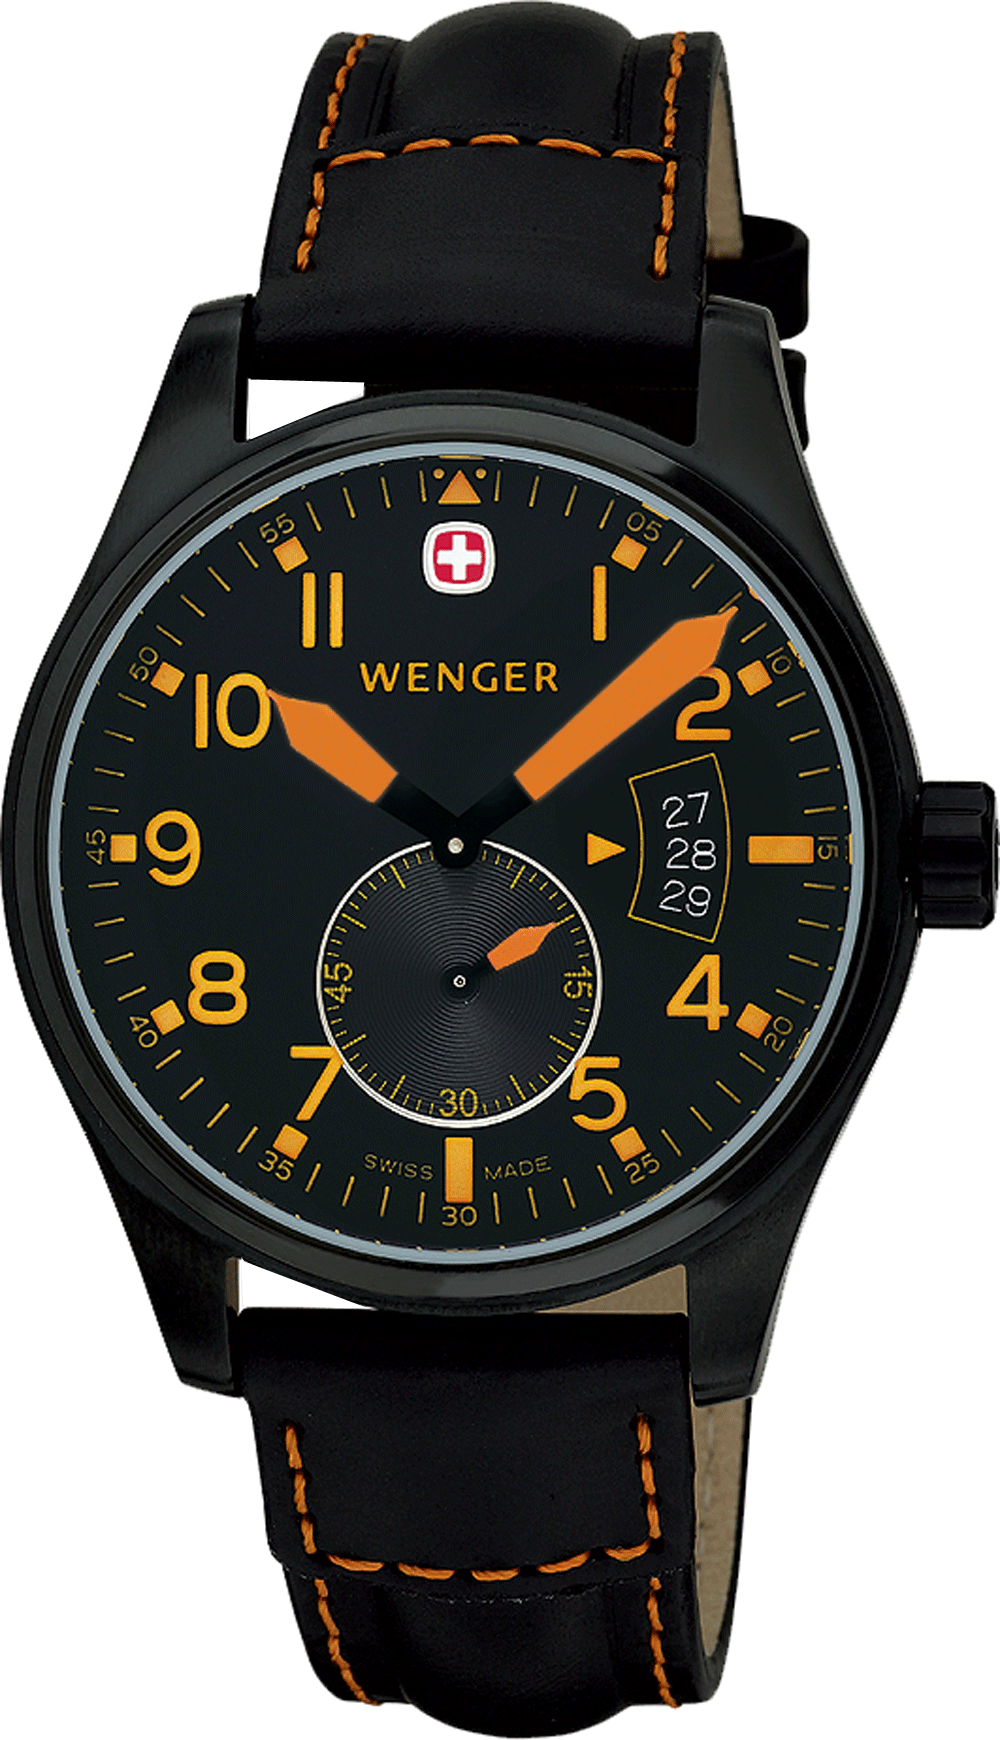 Wenger Watches Battalion III Diver 72347 Mens Black rubber strap new